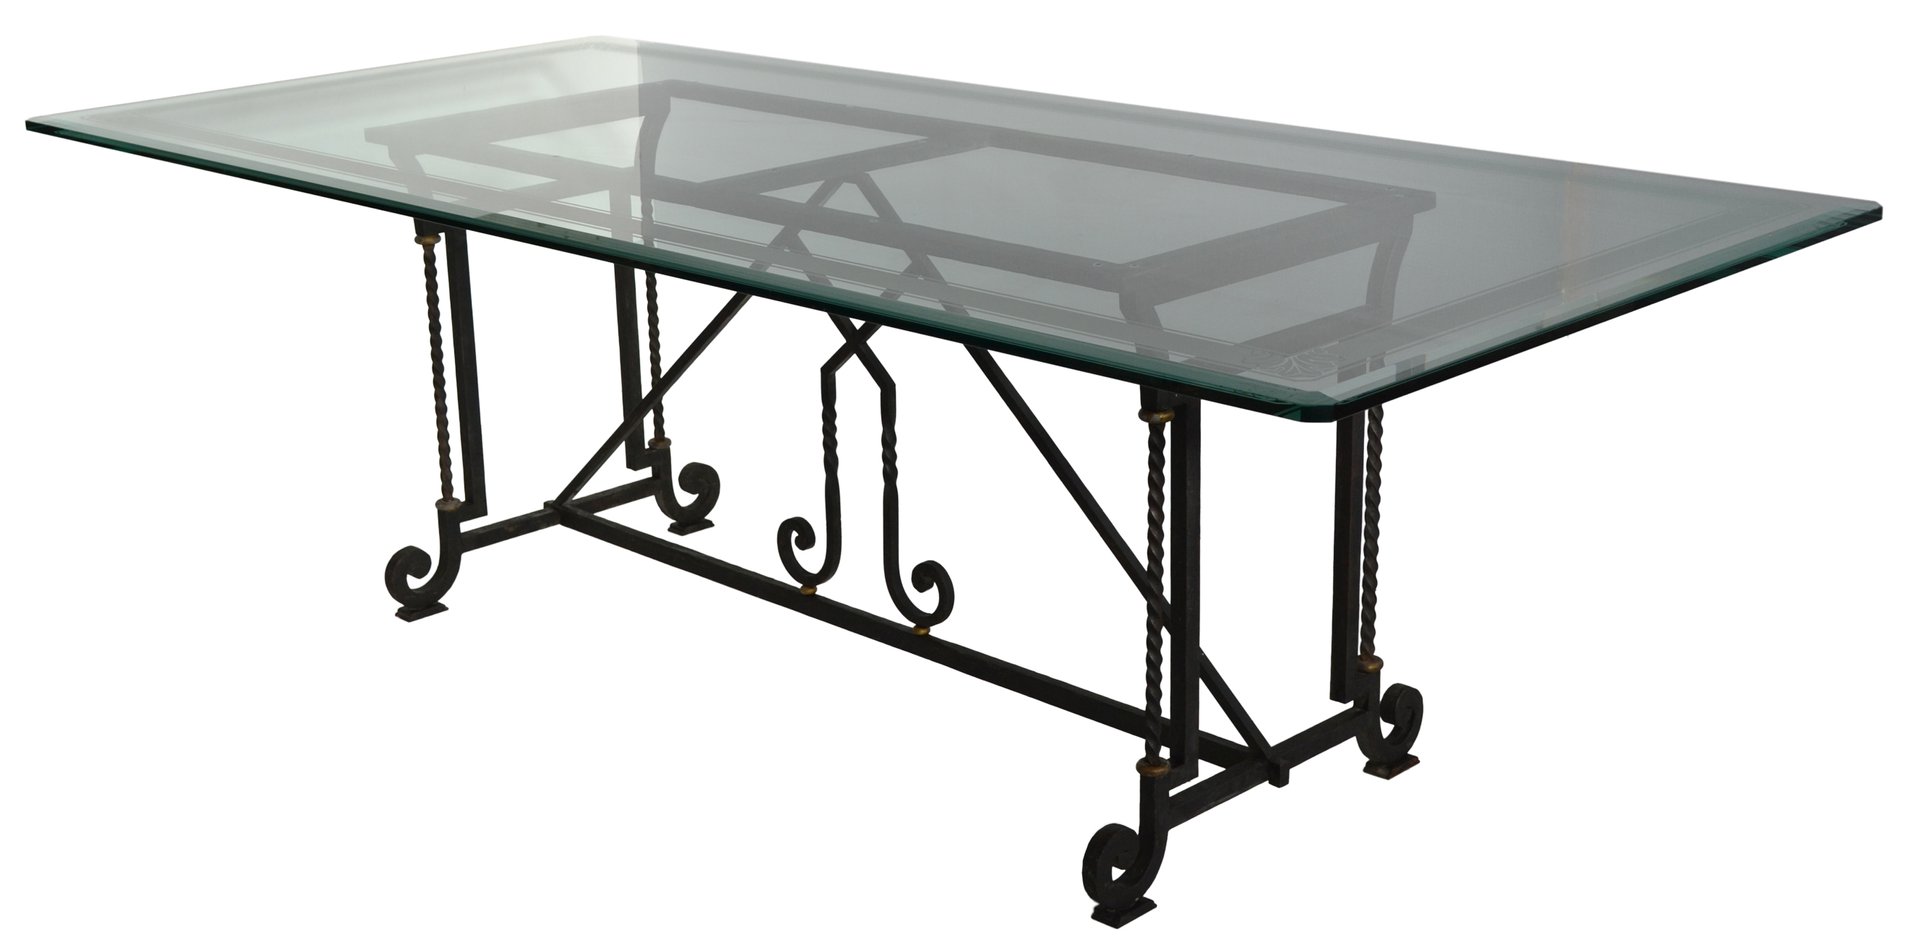 Clear Crystal Glass Wrought Iron Dining Table Or Desk Table By Cupioli For Sale At Pamono